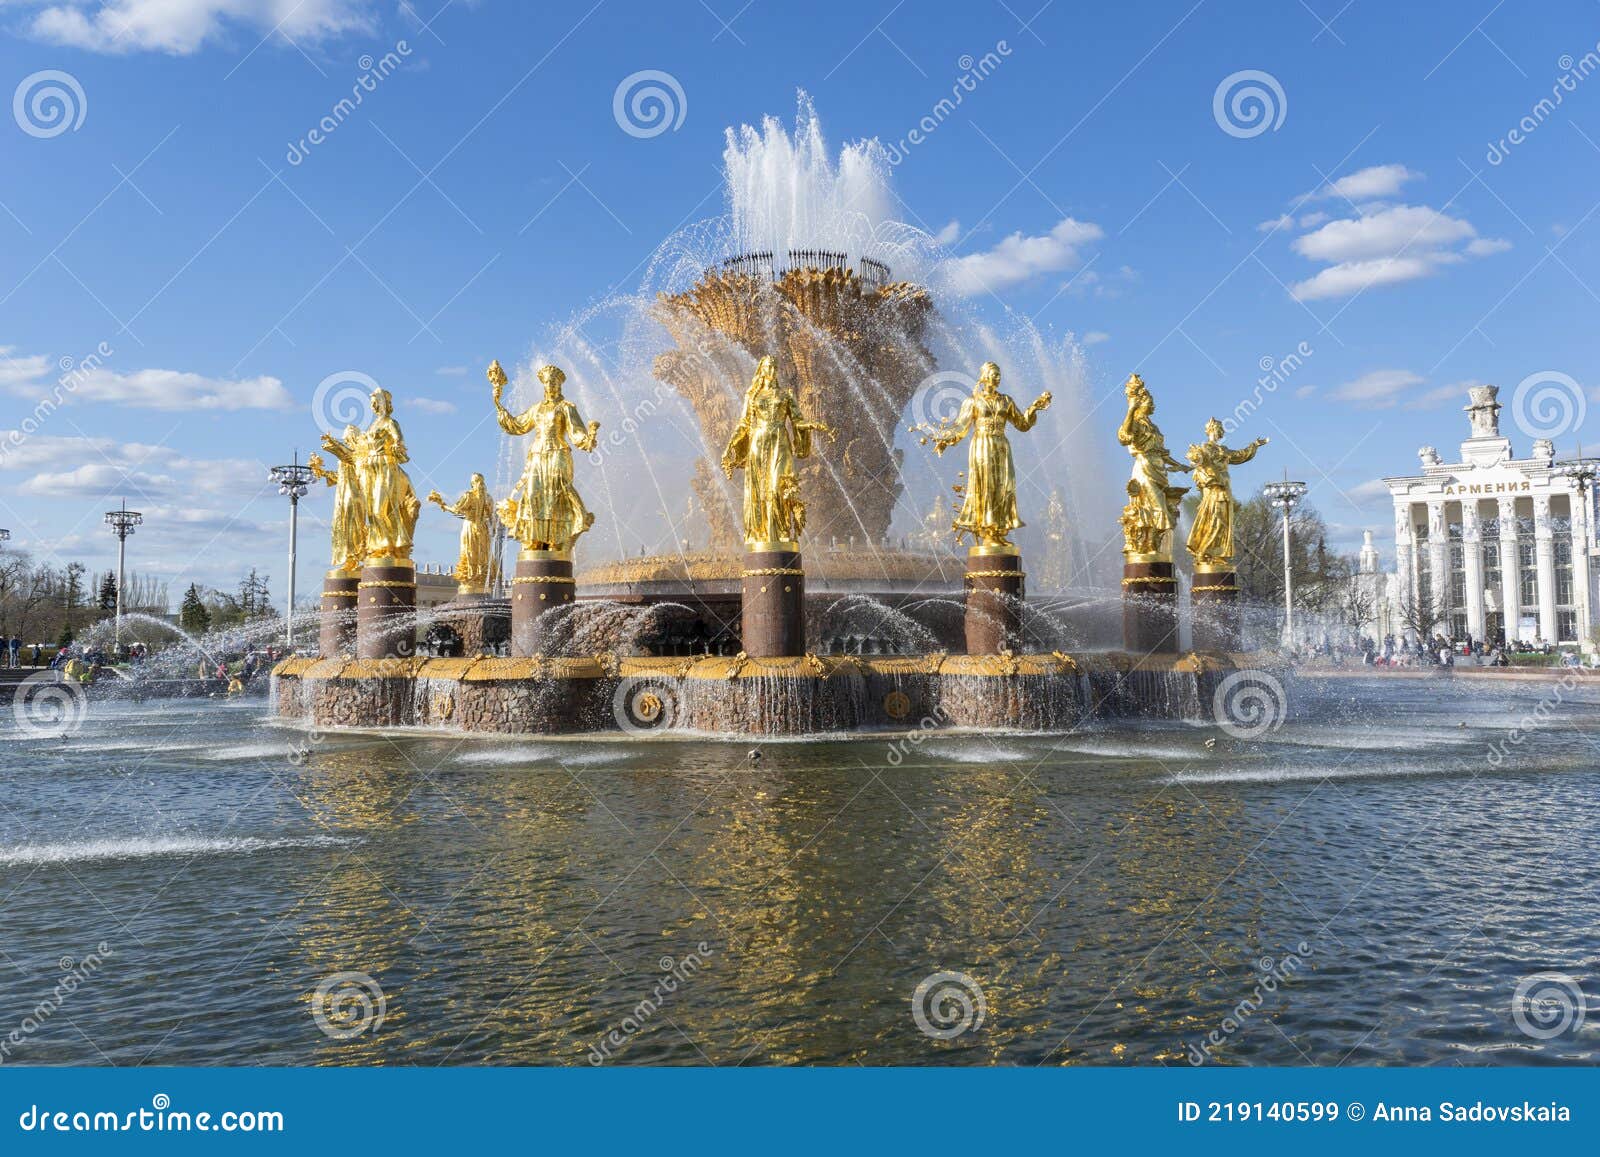 fountain of friendship of people on vdnkh im moscow, famous place for touris visits and sightseen.